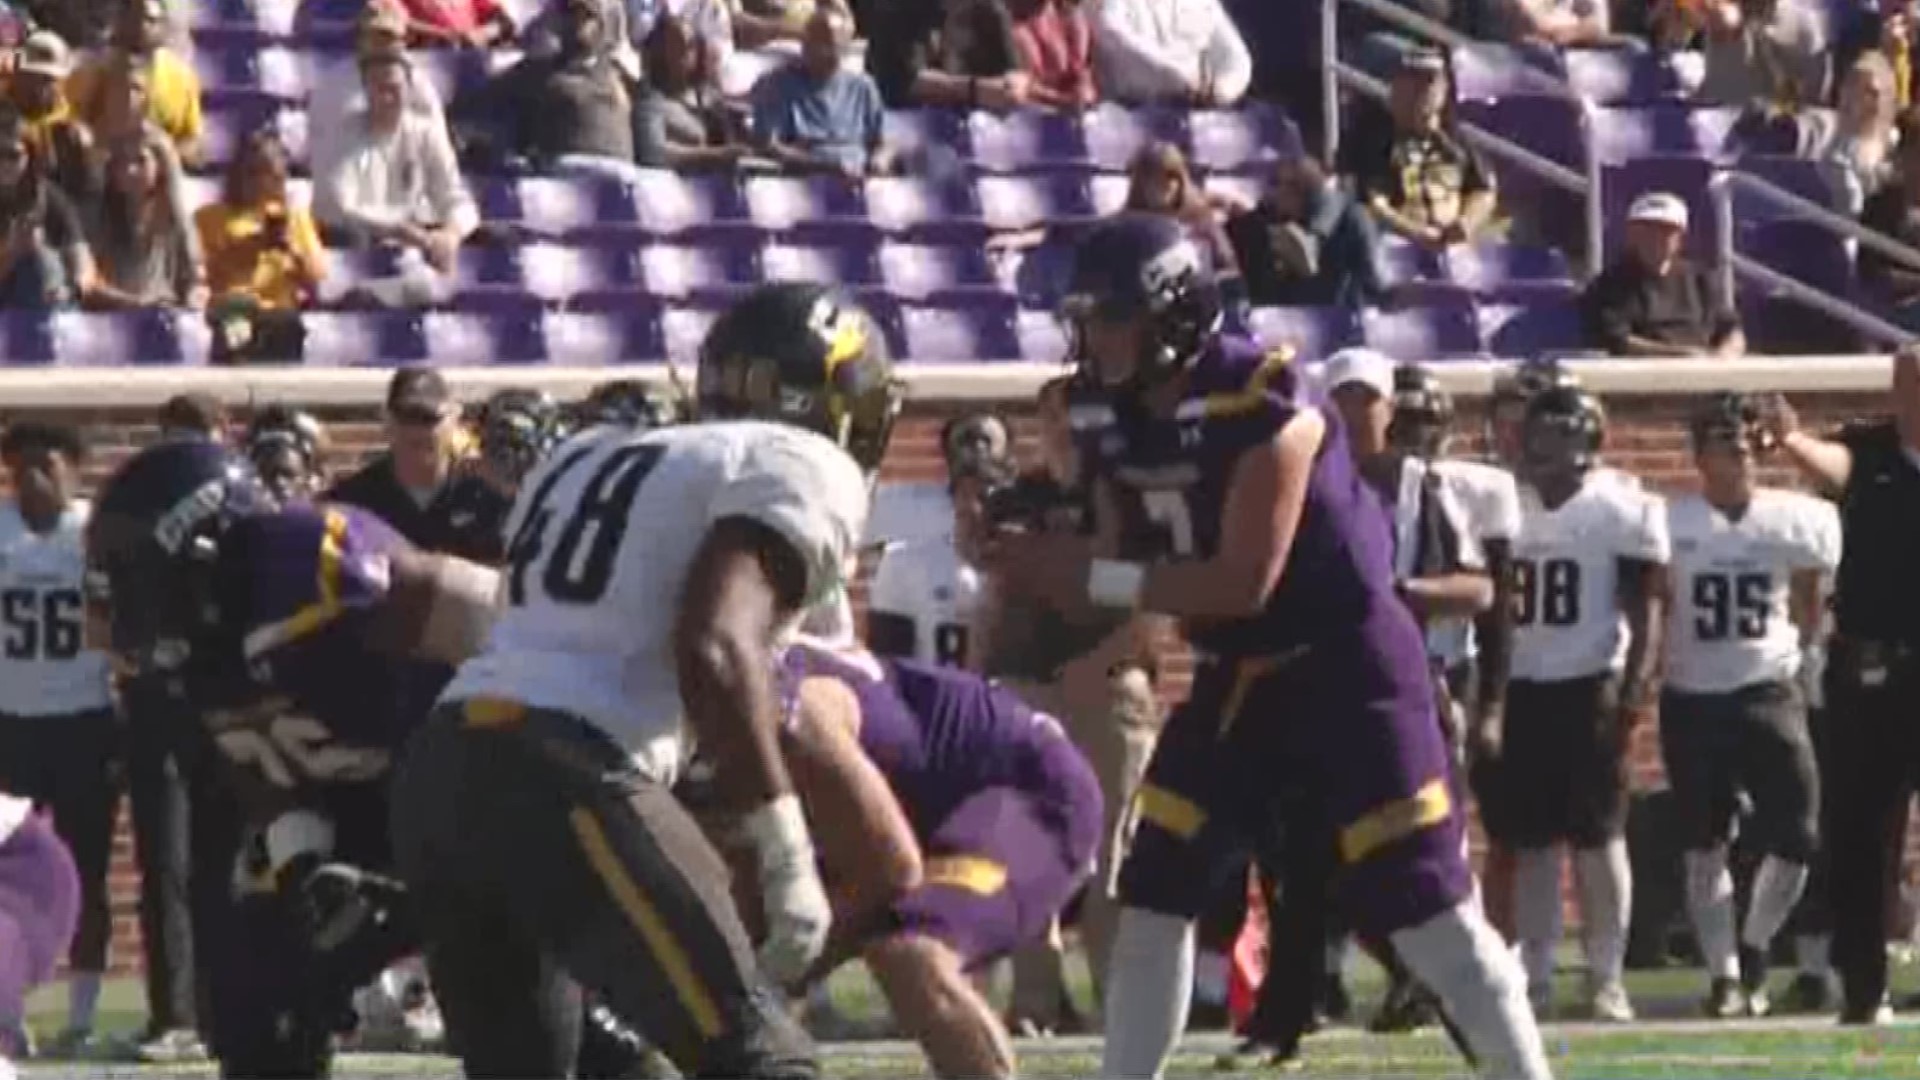 The Cru ended its regular season with a 41-3 win over Texas Lutheran University in Belton.